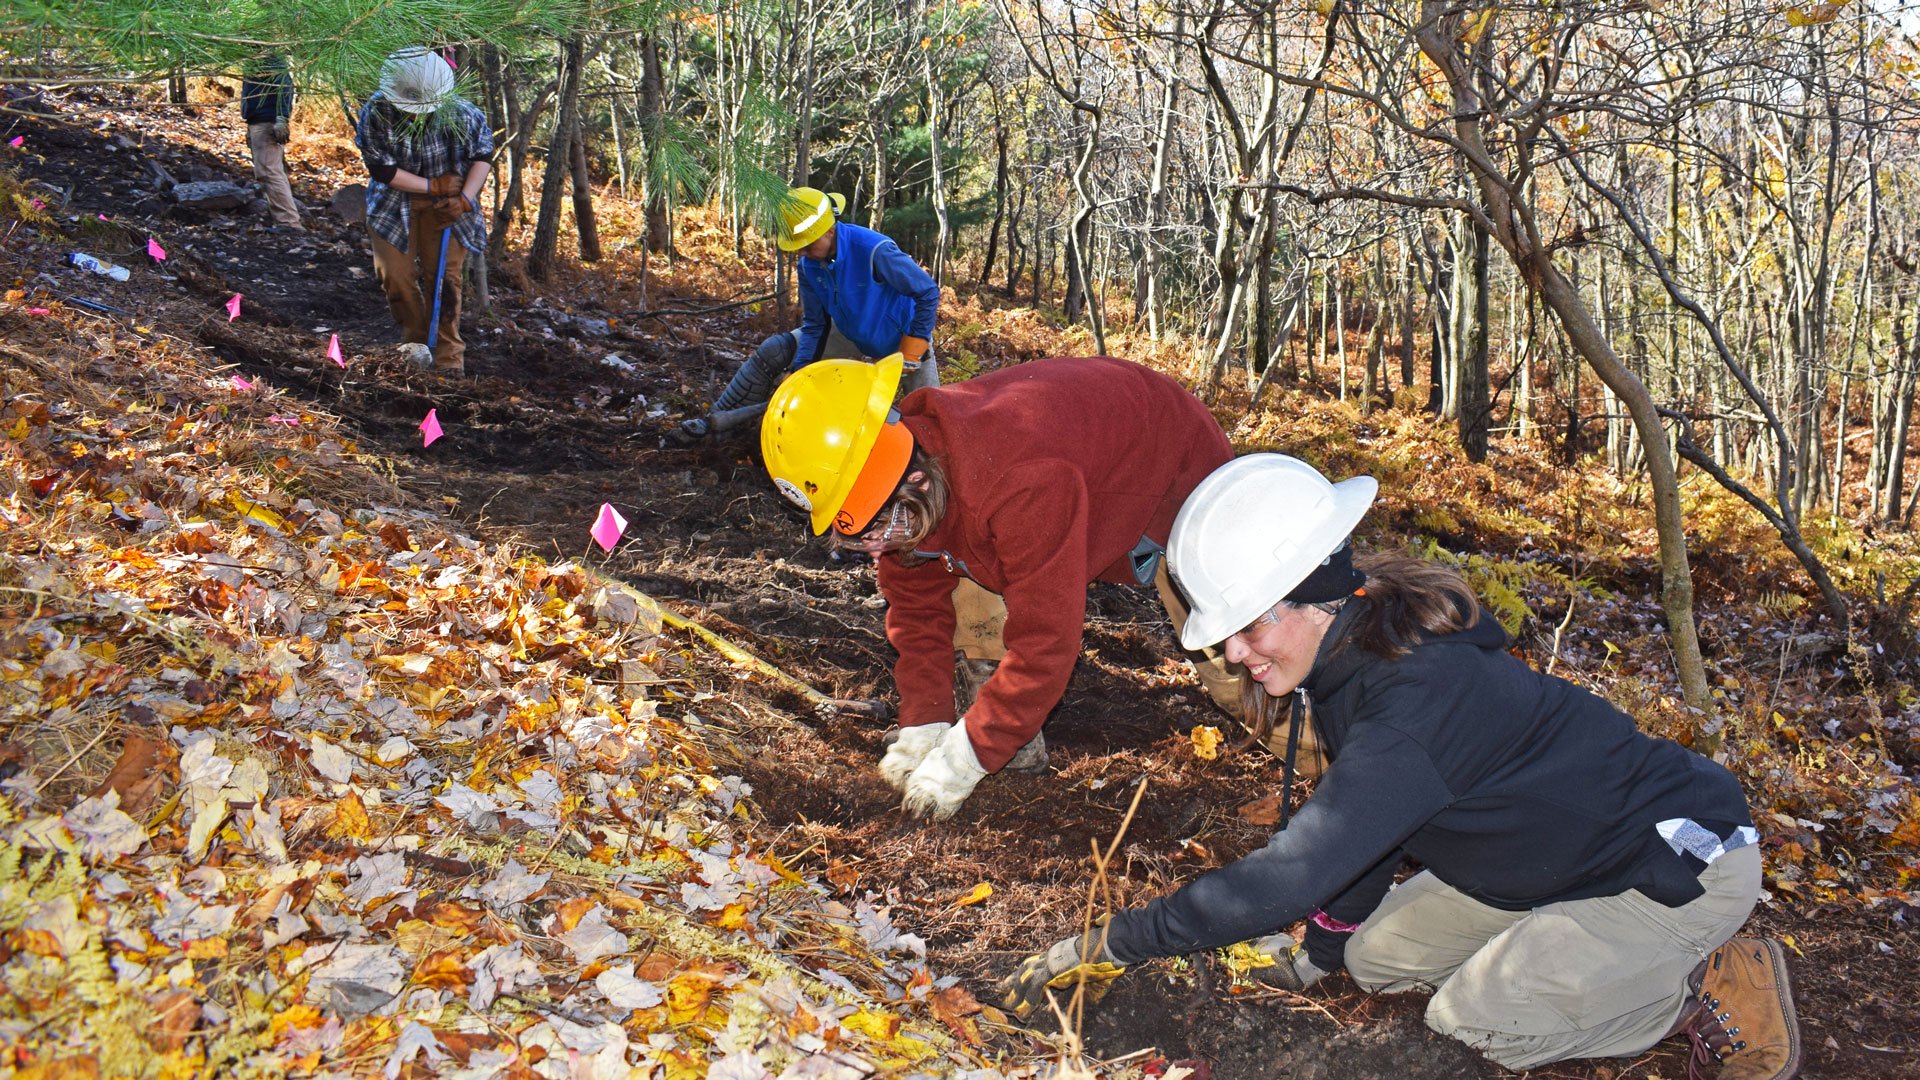 American Conservation Experience participants work on the Appalachian Trail relocation near Palmerton, Pennsylvania/